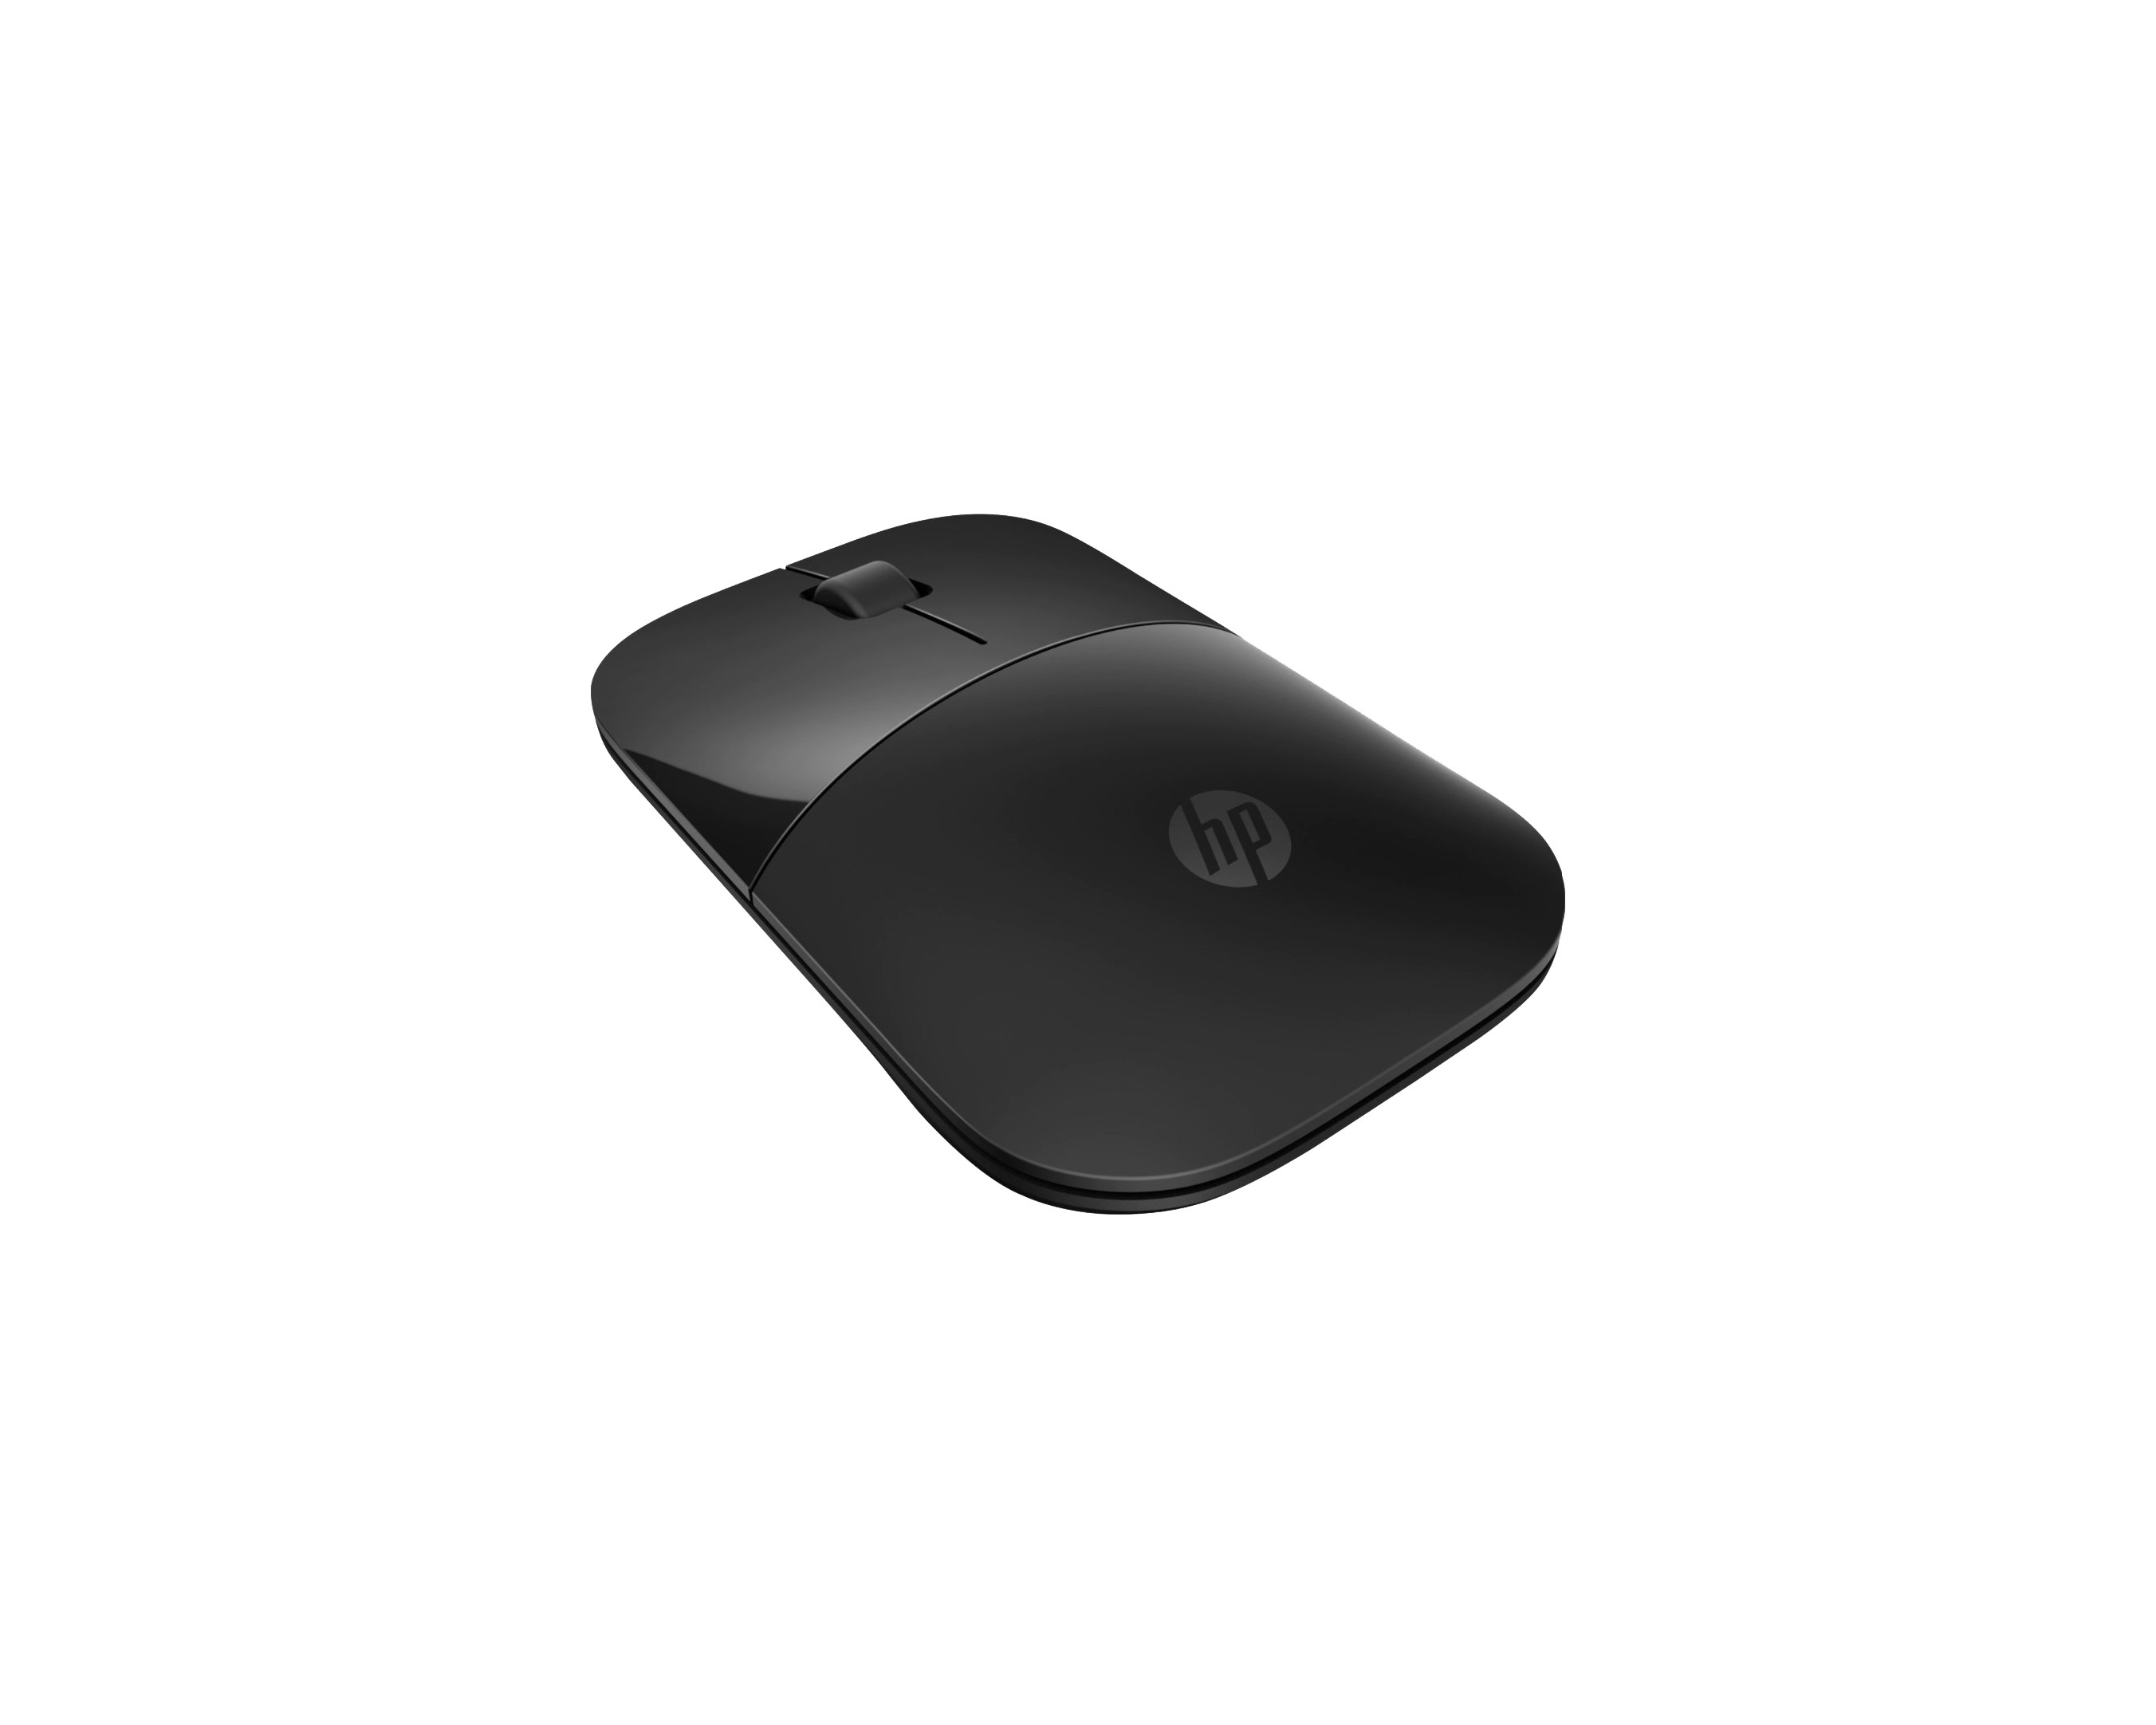 HP Z3700 Mail Reviewing the Daily Mouse - Wireless